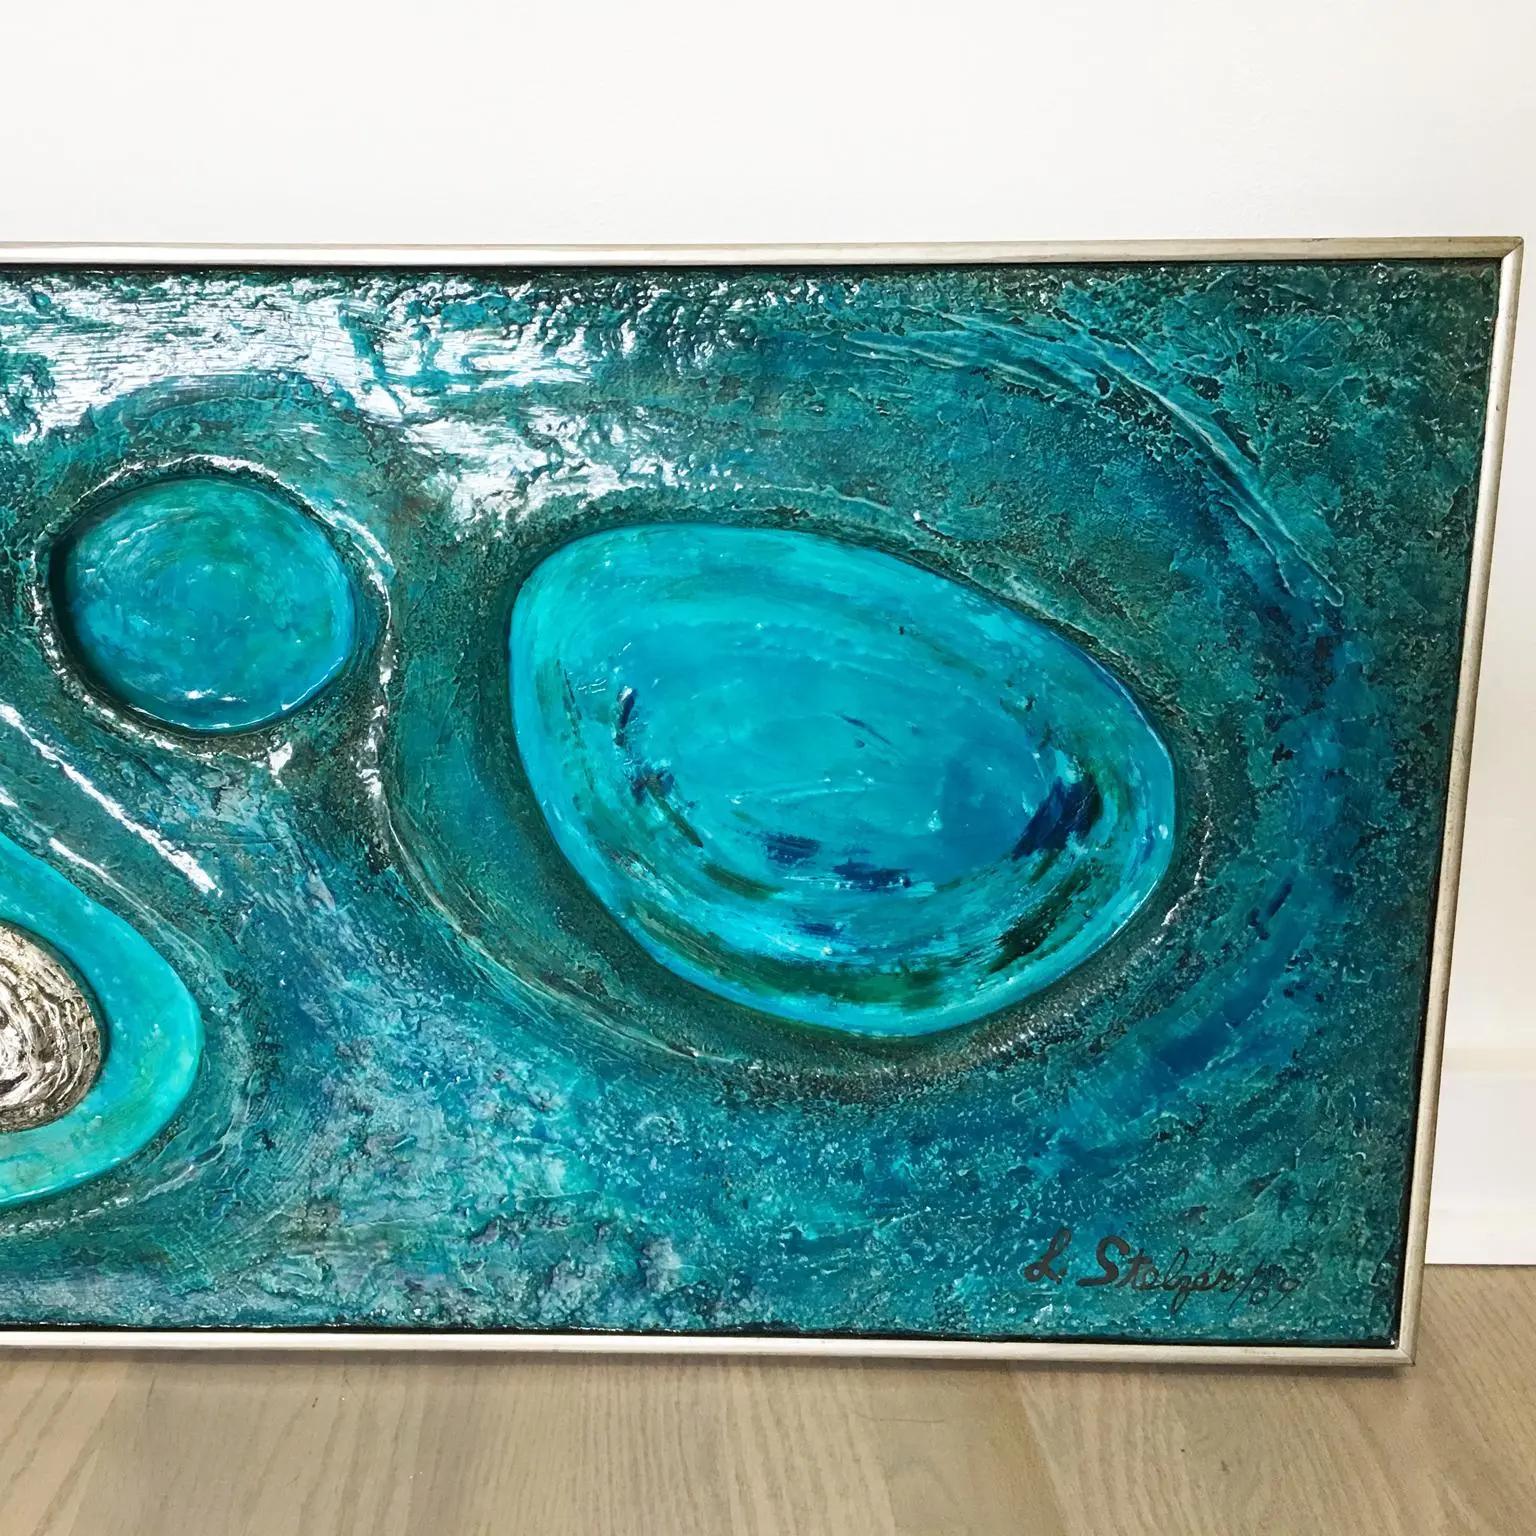 Lorraine Stelzer Turquoise Acrylic Resin Psychedelic Art Wall Sculpture Panel For Sale 2